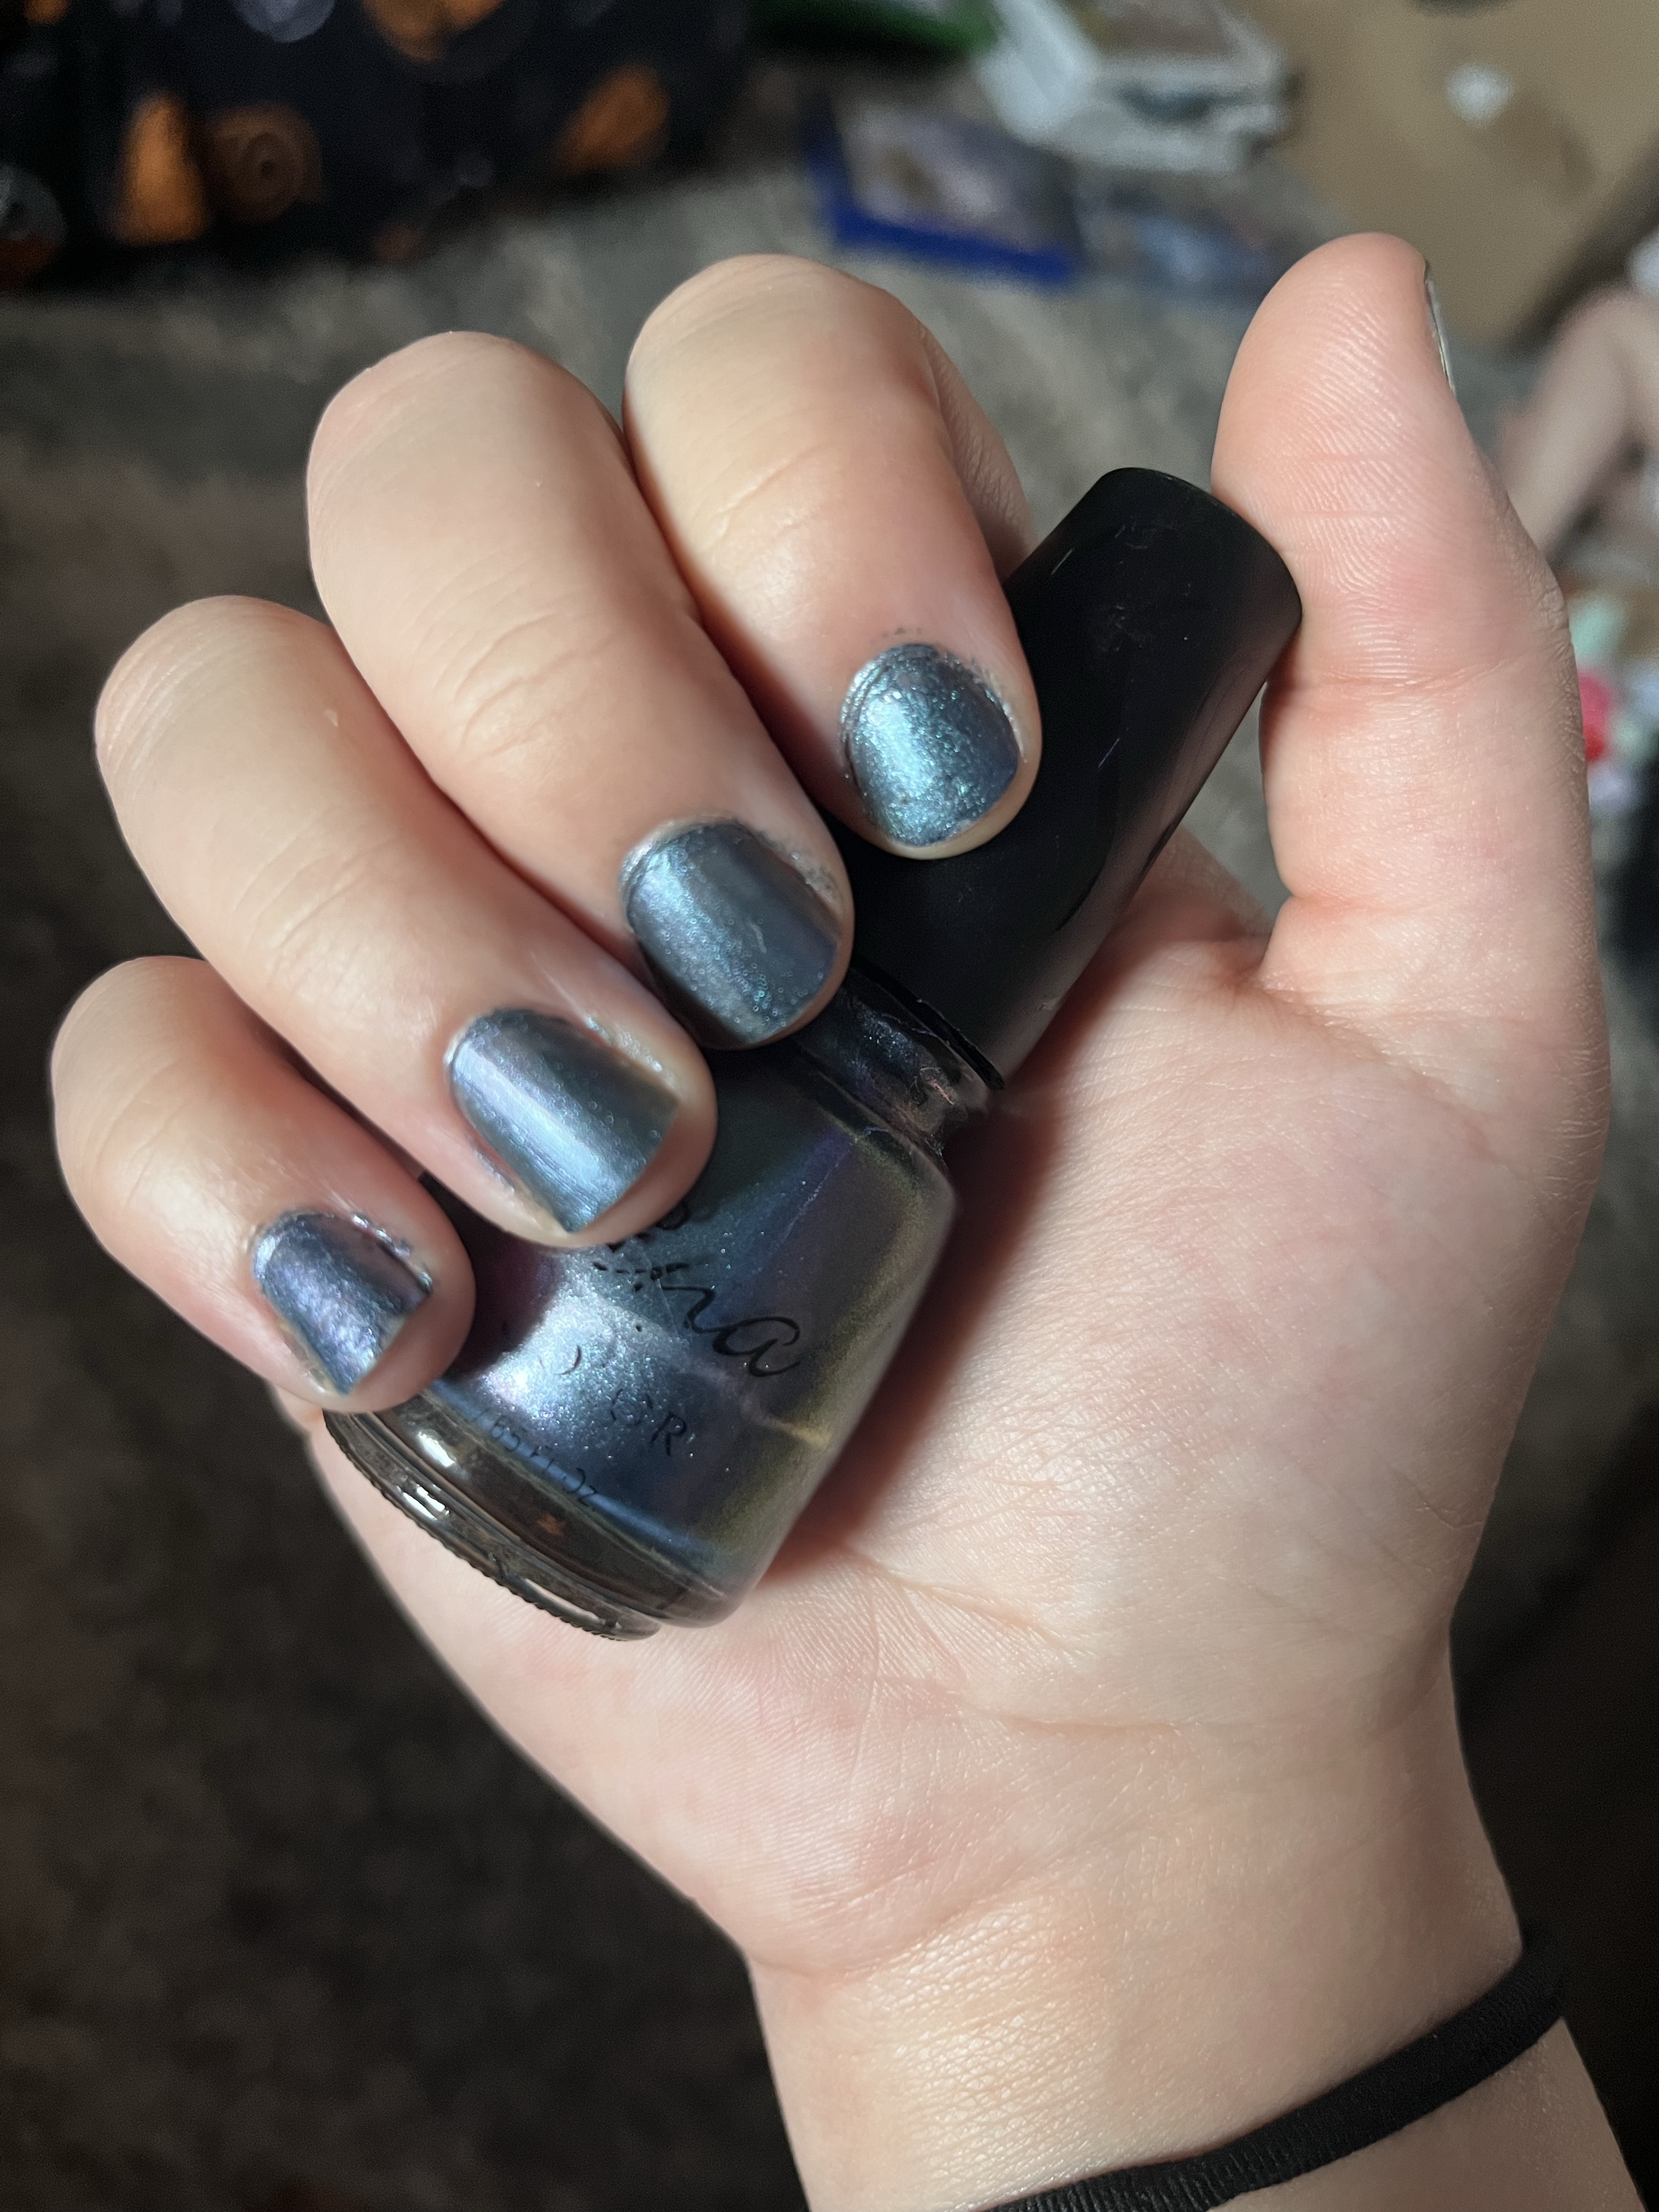 self-care act painting my nails. I chose a shimmery blue color and I am wearing a black hairtie around my wrist holding the nail polish bottle to show off my nails.